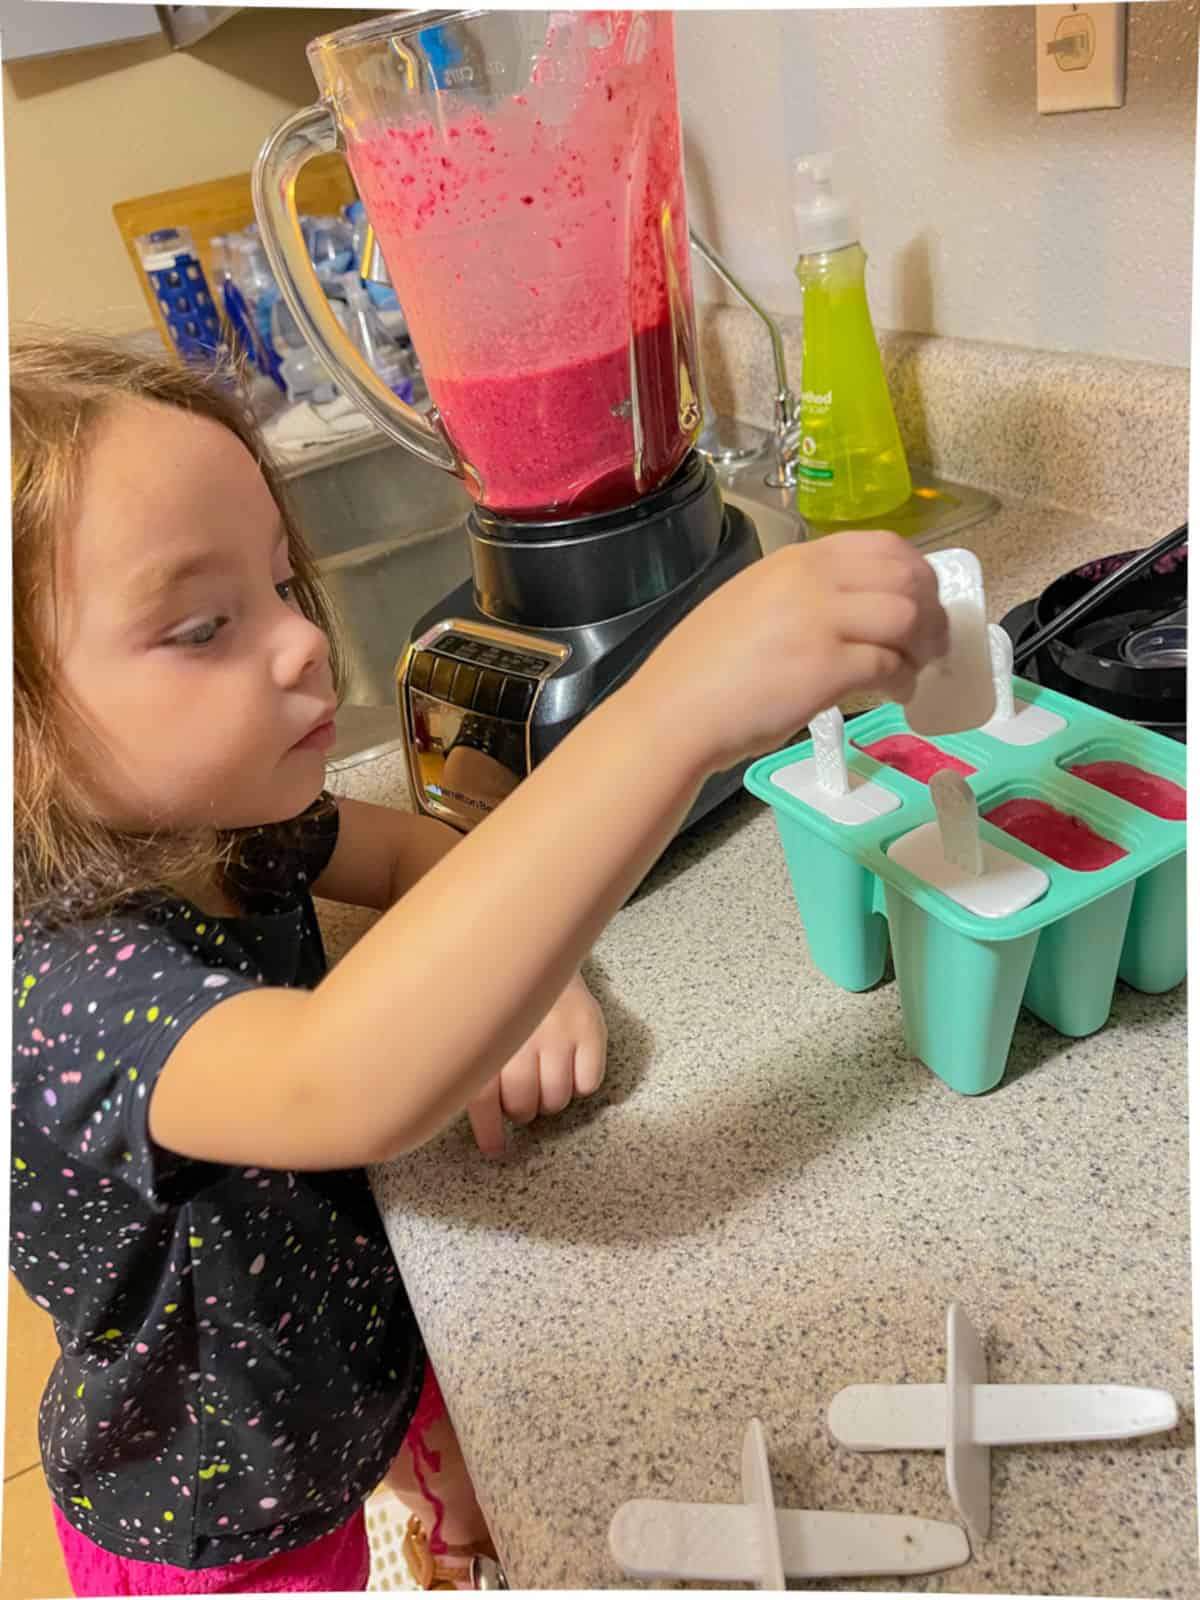 A small child wearing a black shirt with multicolored paint spray spots and pink shorts. She is standing on a step stool at the kitchen counter with a teal popsicle mold next to a blender filled with strawberry colored juice in it. The juice is being filled into the popsicle mold and there arer white sticked the child is placing into the mold.